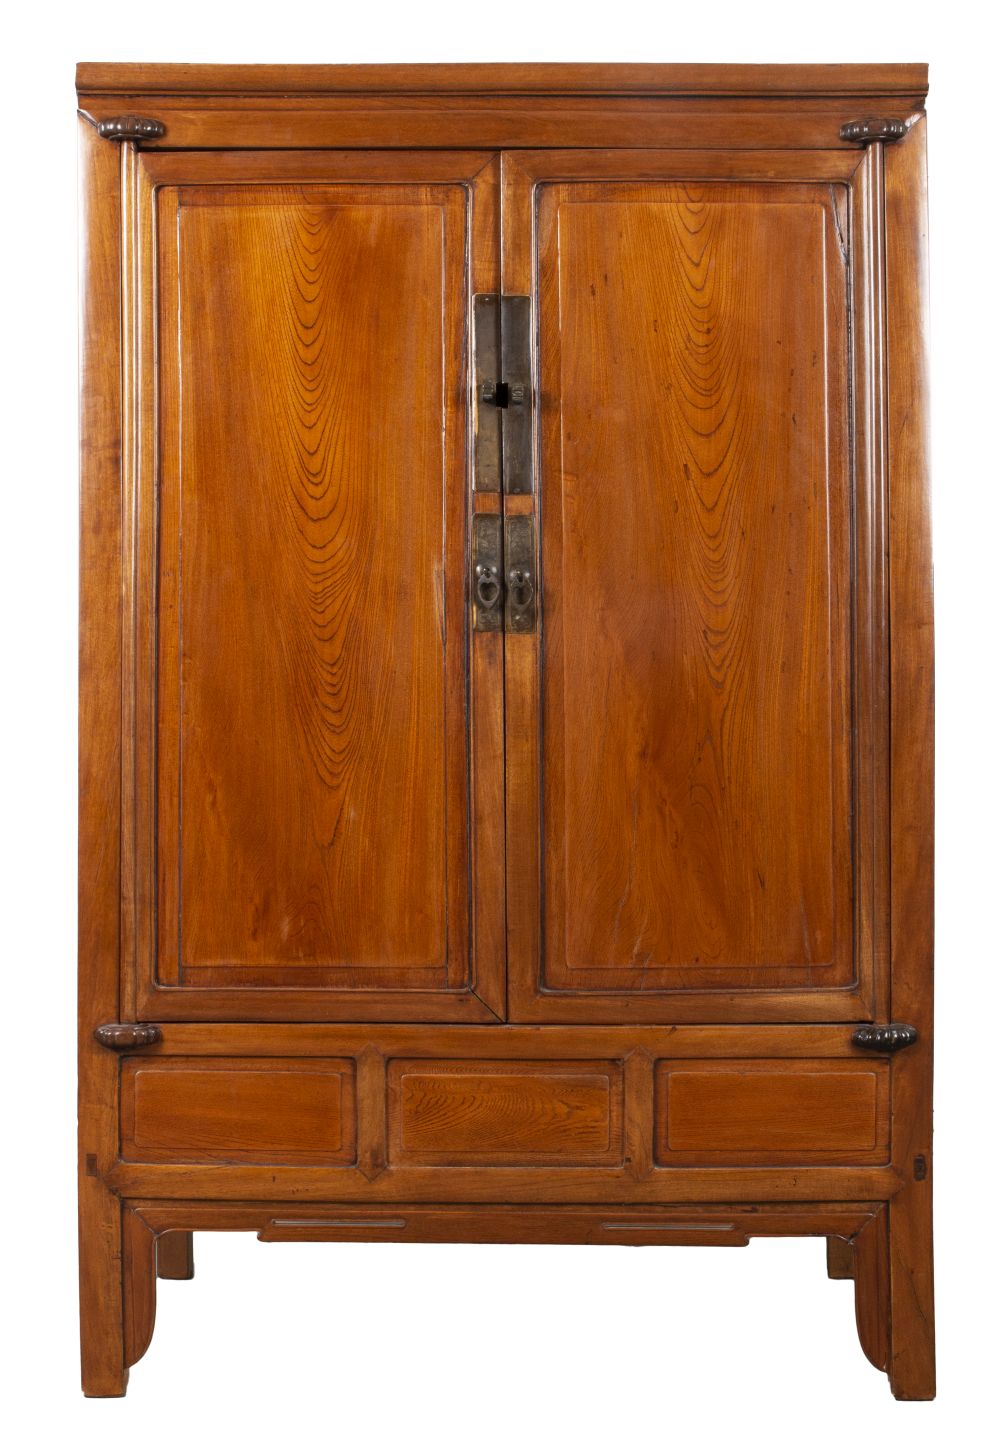 CHINESE CARVED HARDWOOD ARMOIRE 3c56dc